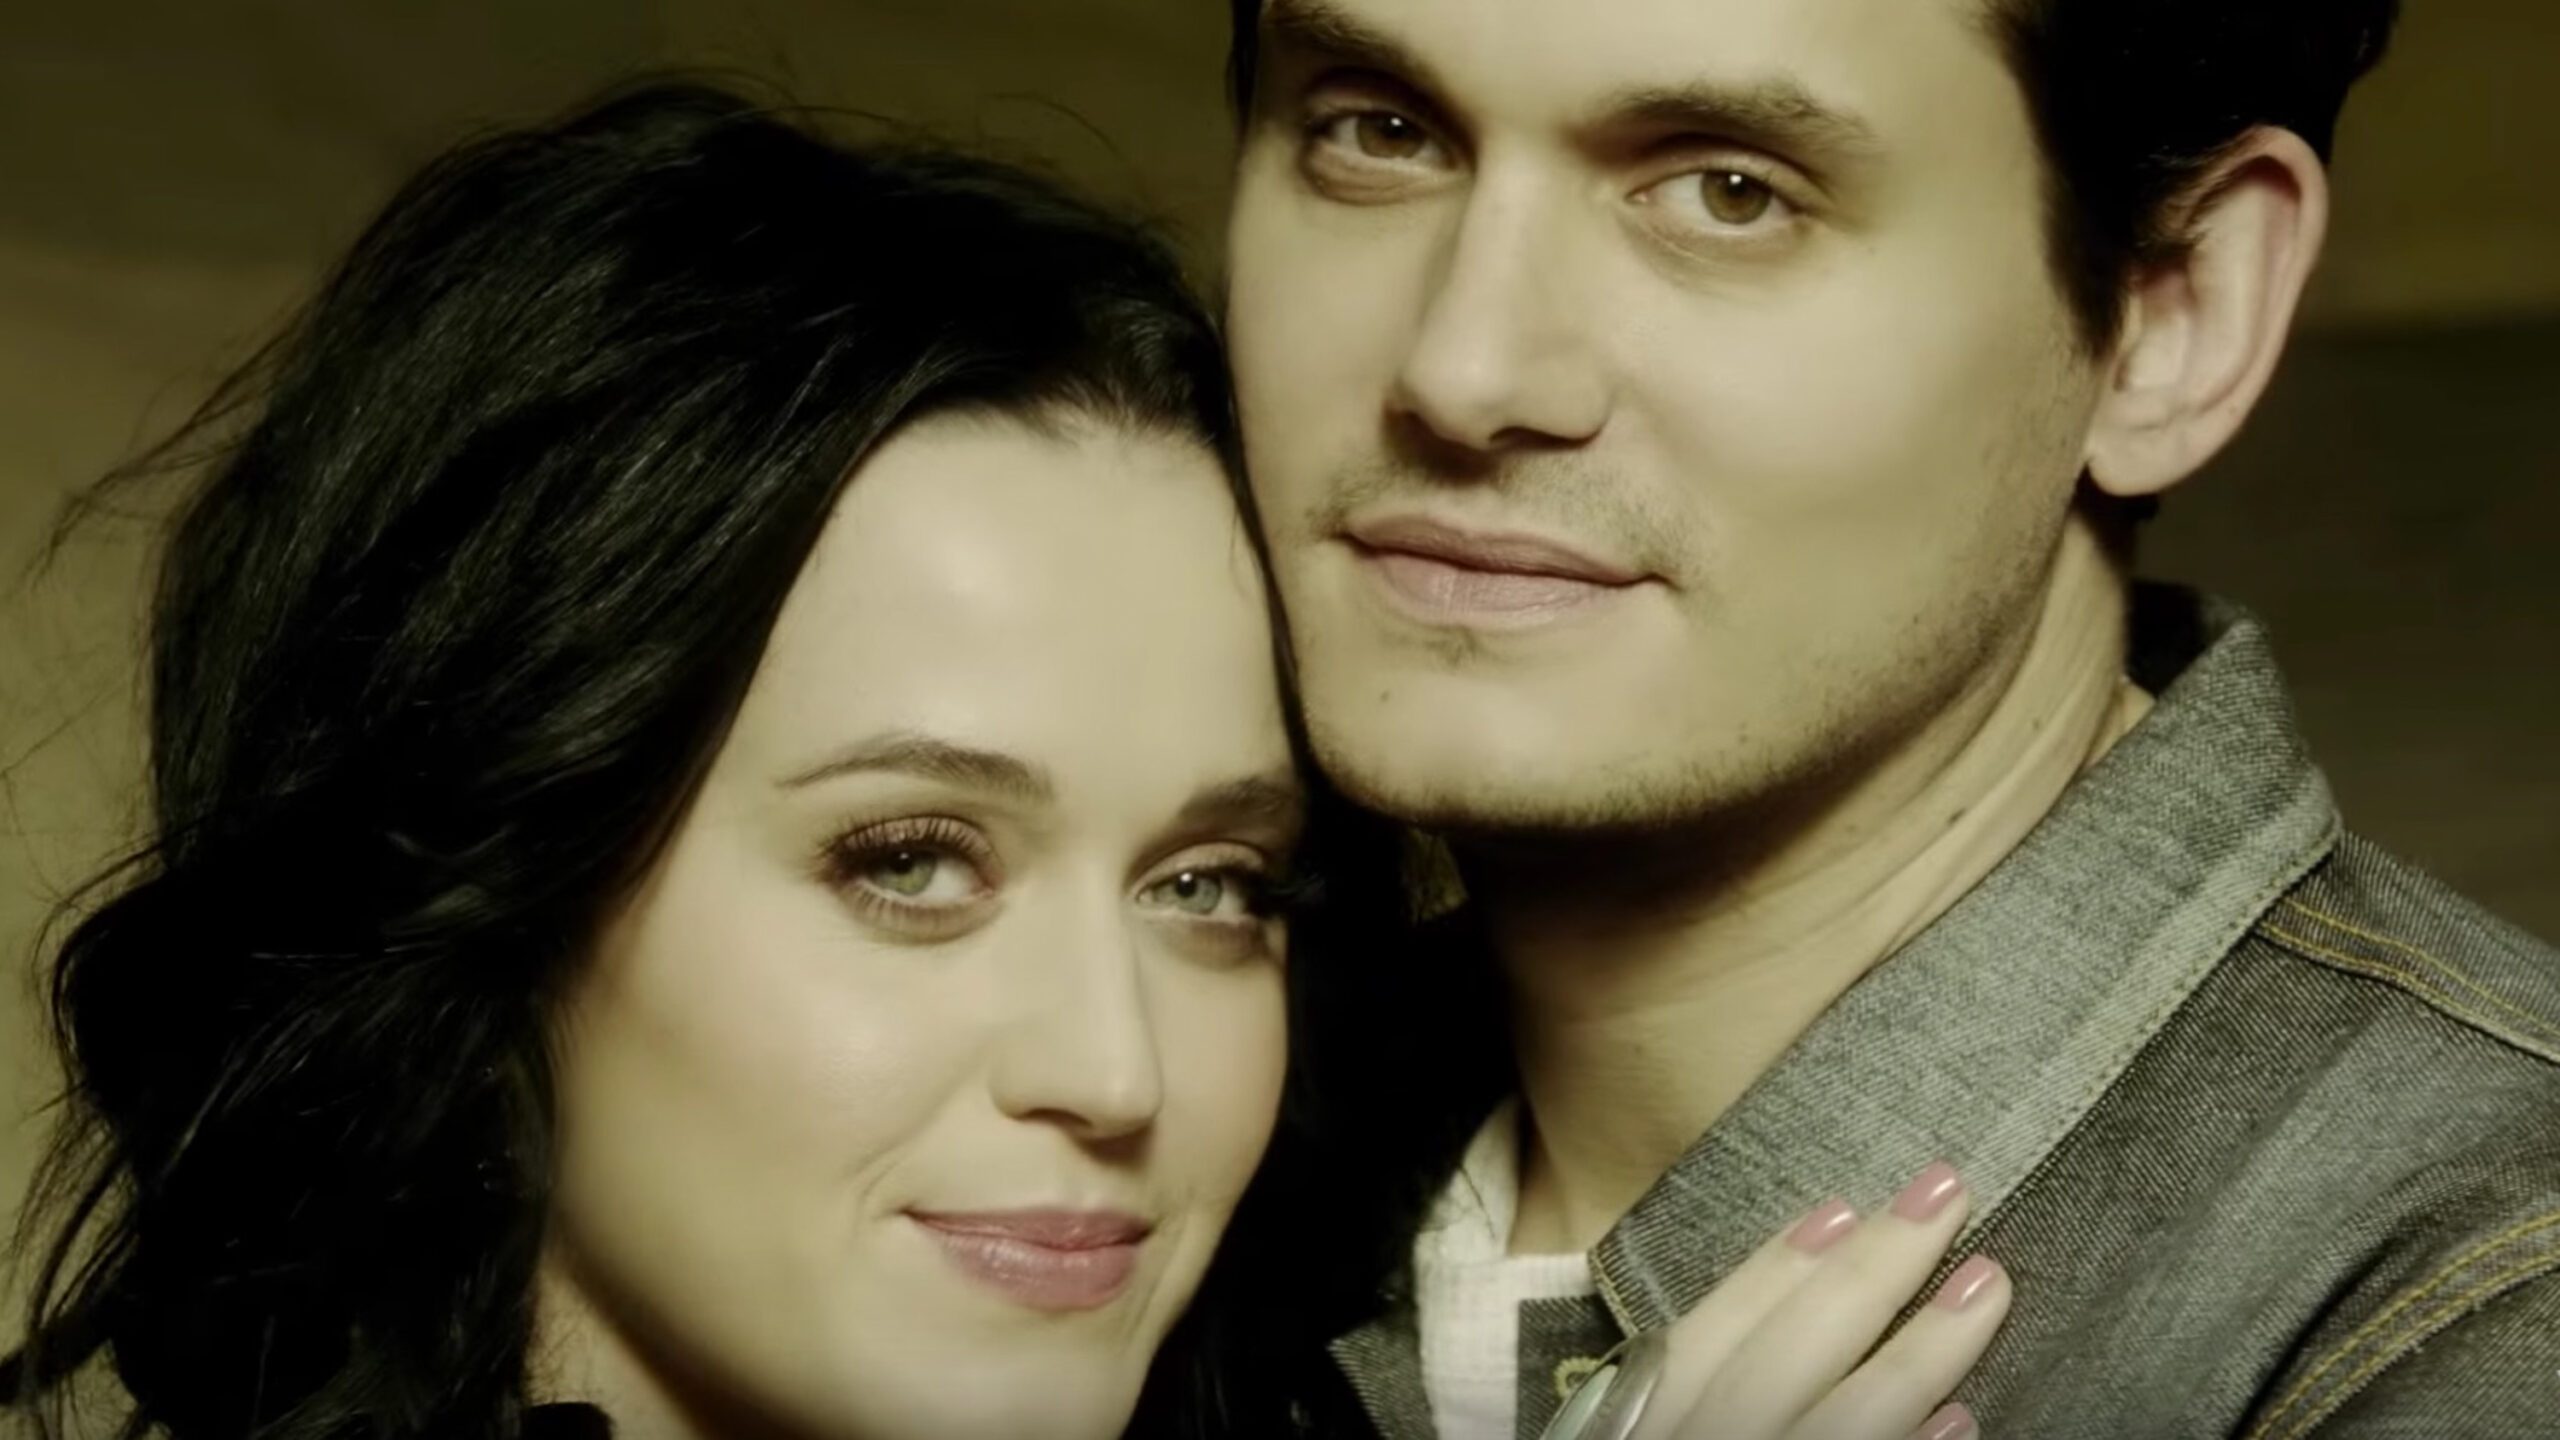 John Mayer admits his new song is about Katy Perry